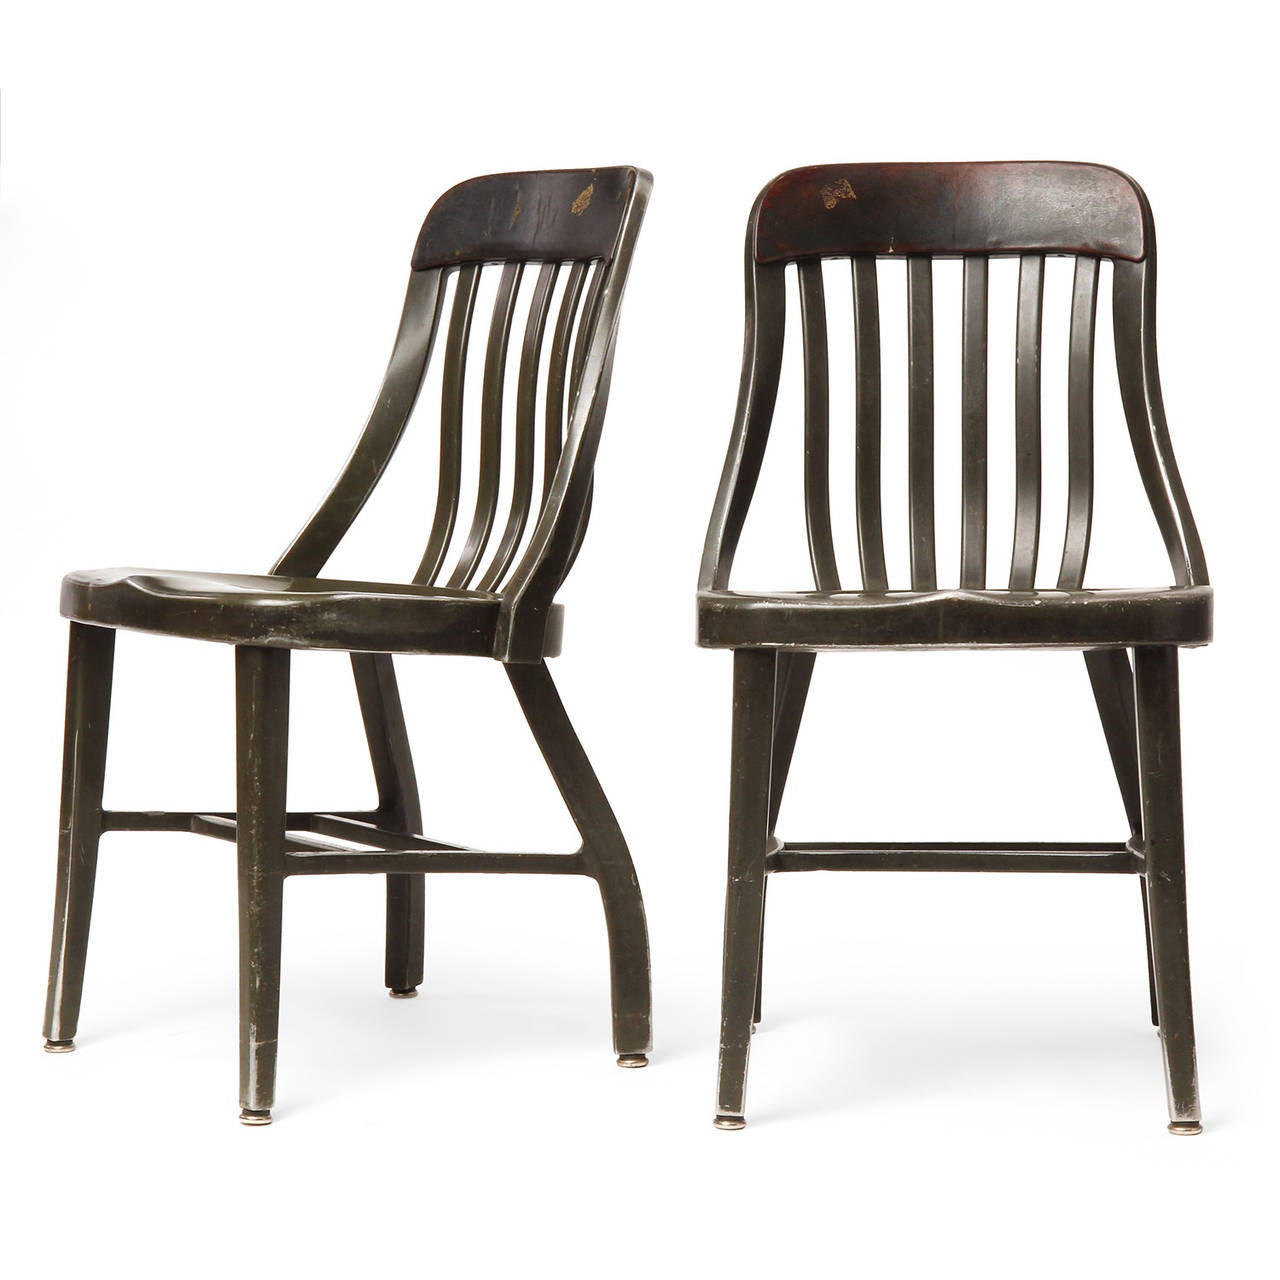 An expressive and unusual pair of side chairs made of cast and formed aluminum having scrolling slatted backs with a narrow leather cushion and dramatically angled rear legs.